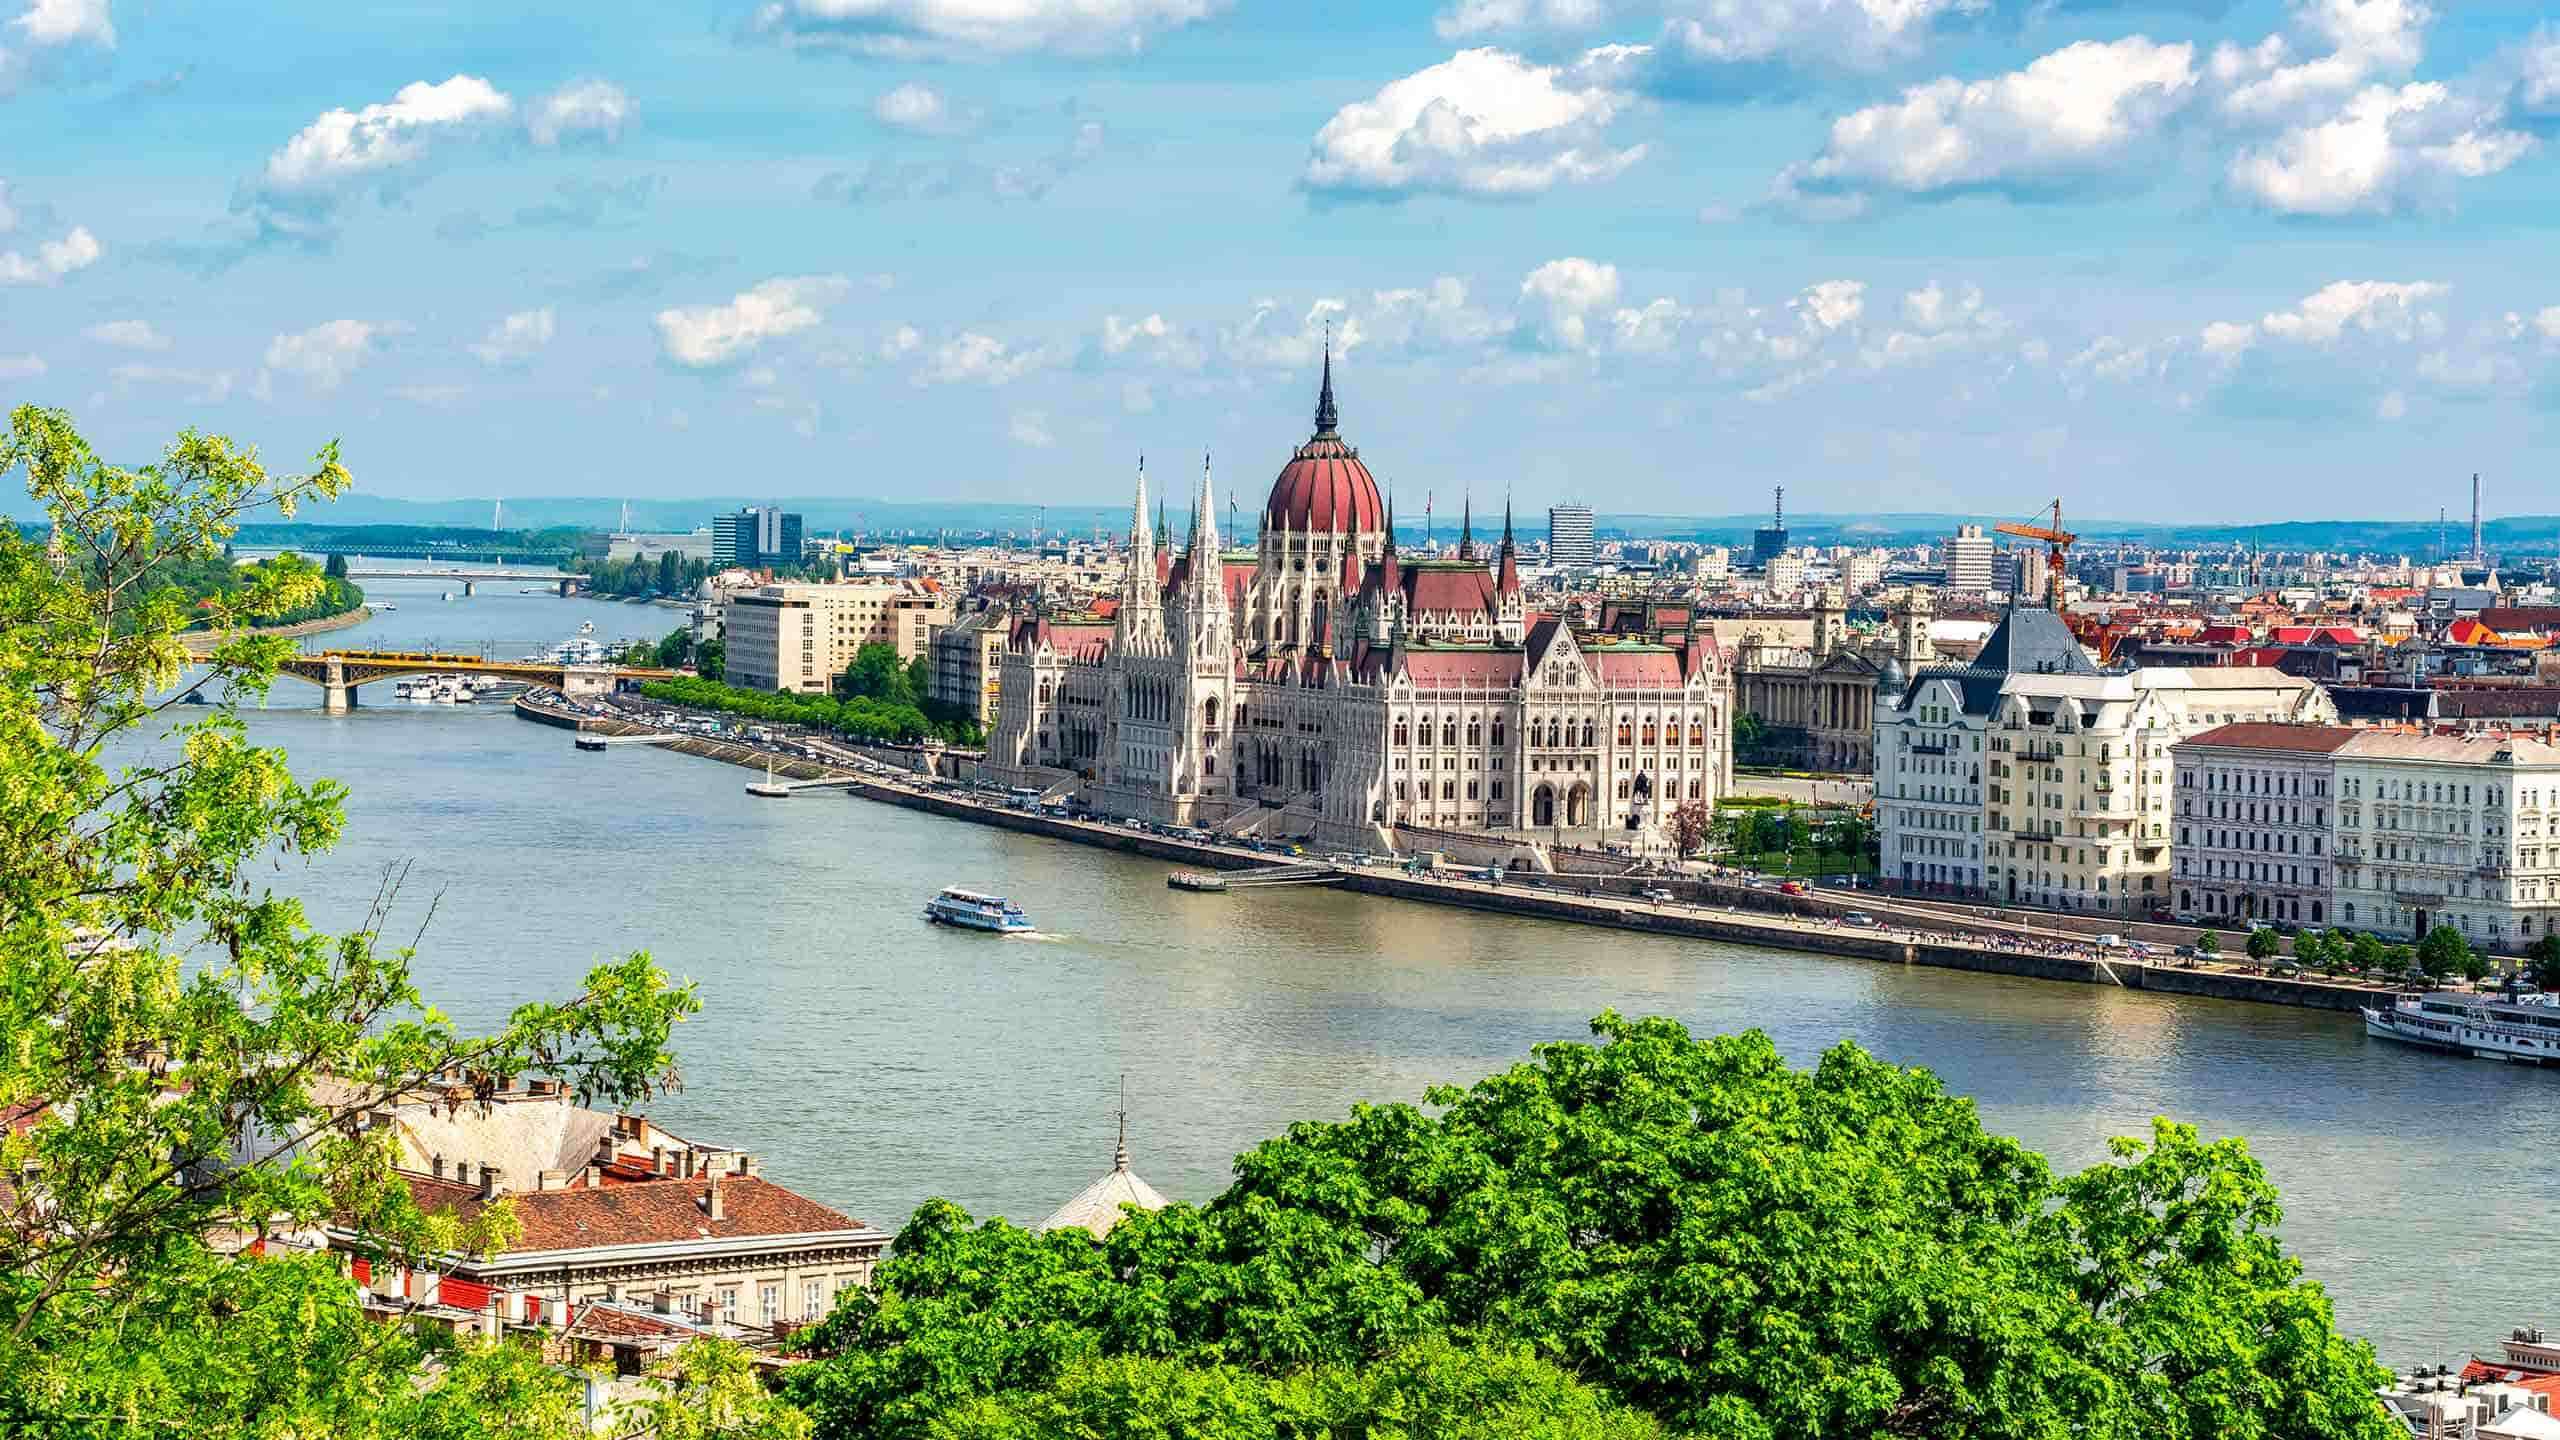 Active & Discovery Cruise A Taste Of The Danube With Budapest (Vienna To Budpaest) 6D5N